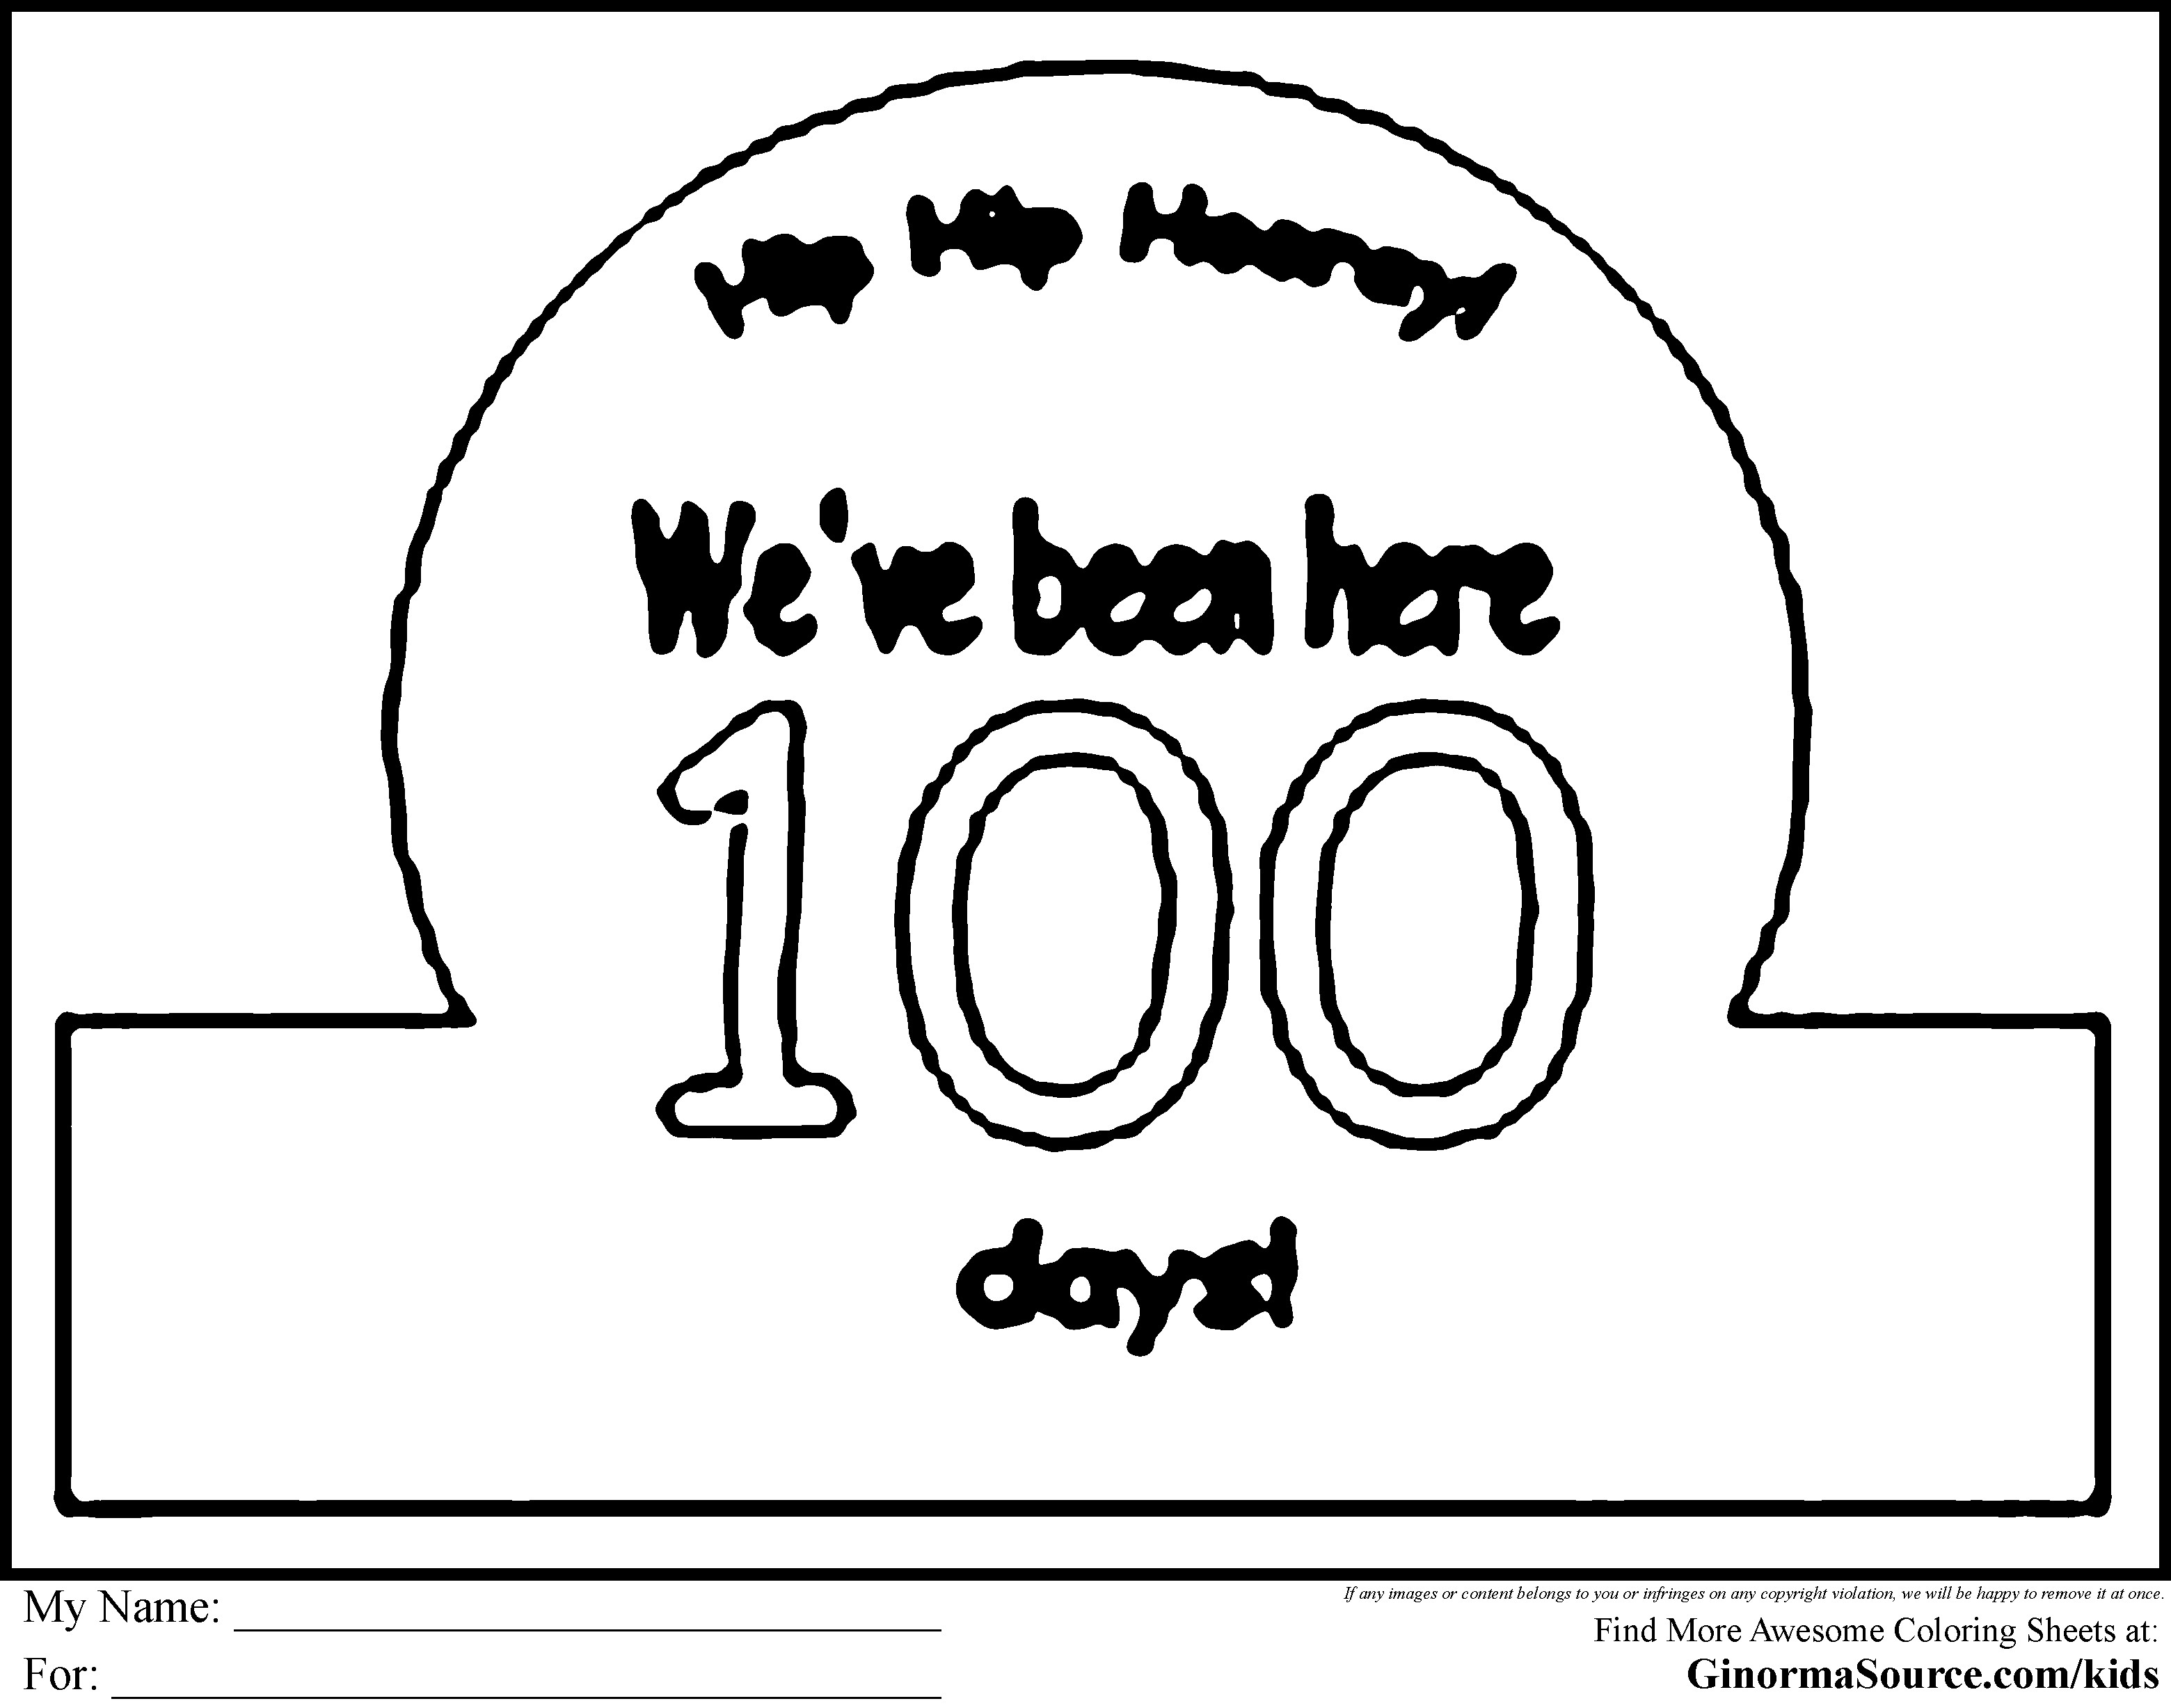 100 Days Coloring Pages
 100th Day School Coloring Pages Free Coloring Home